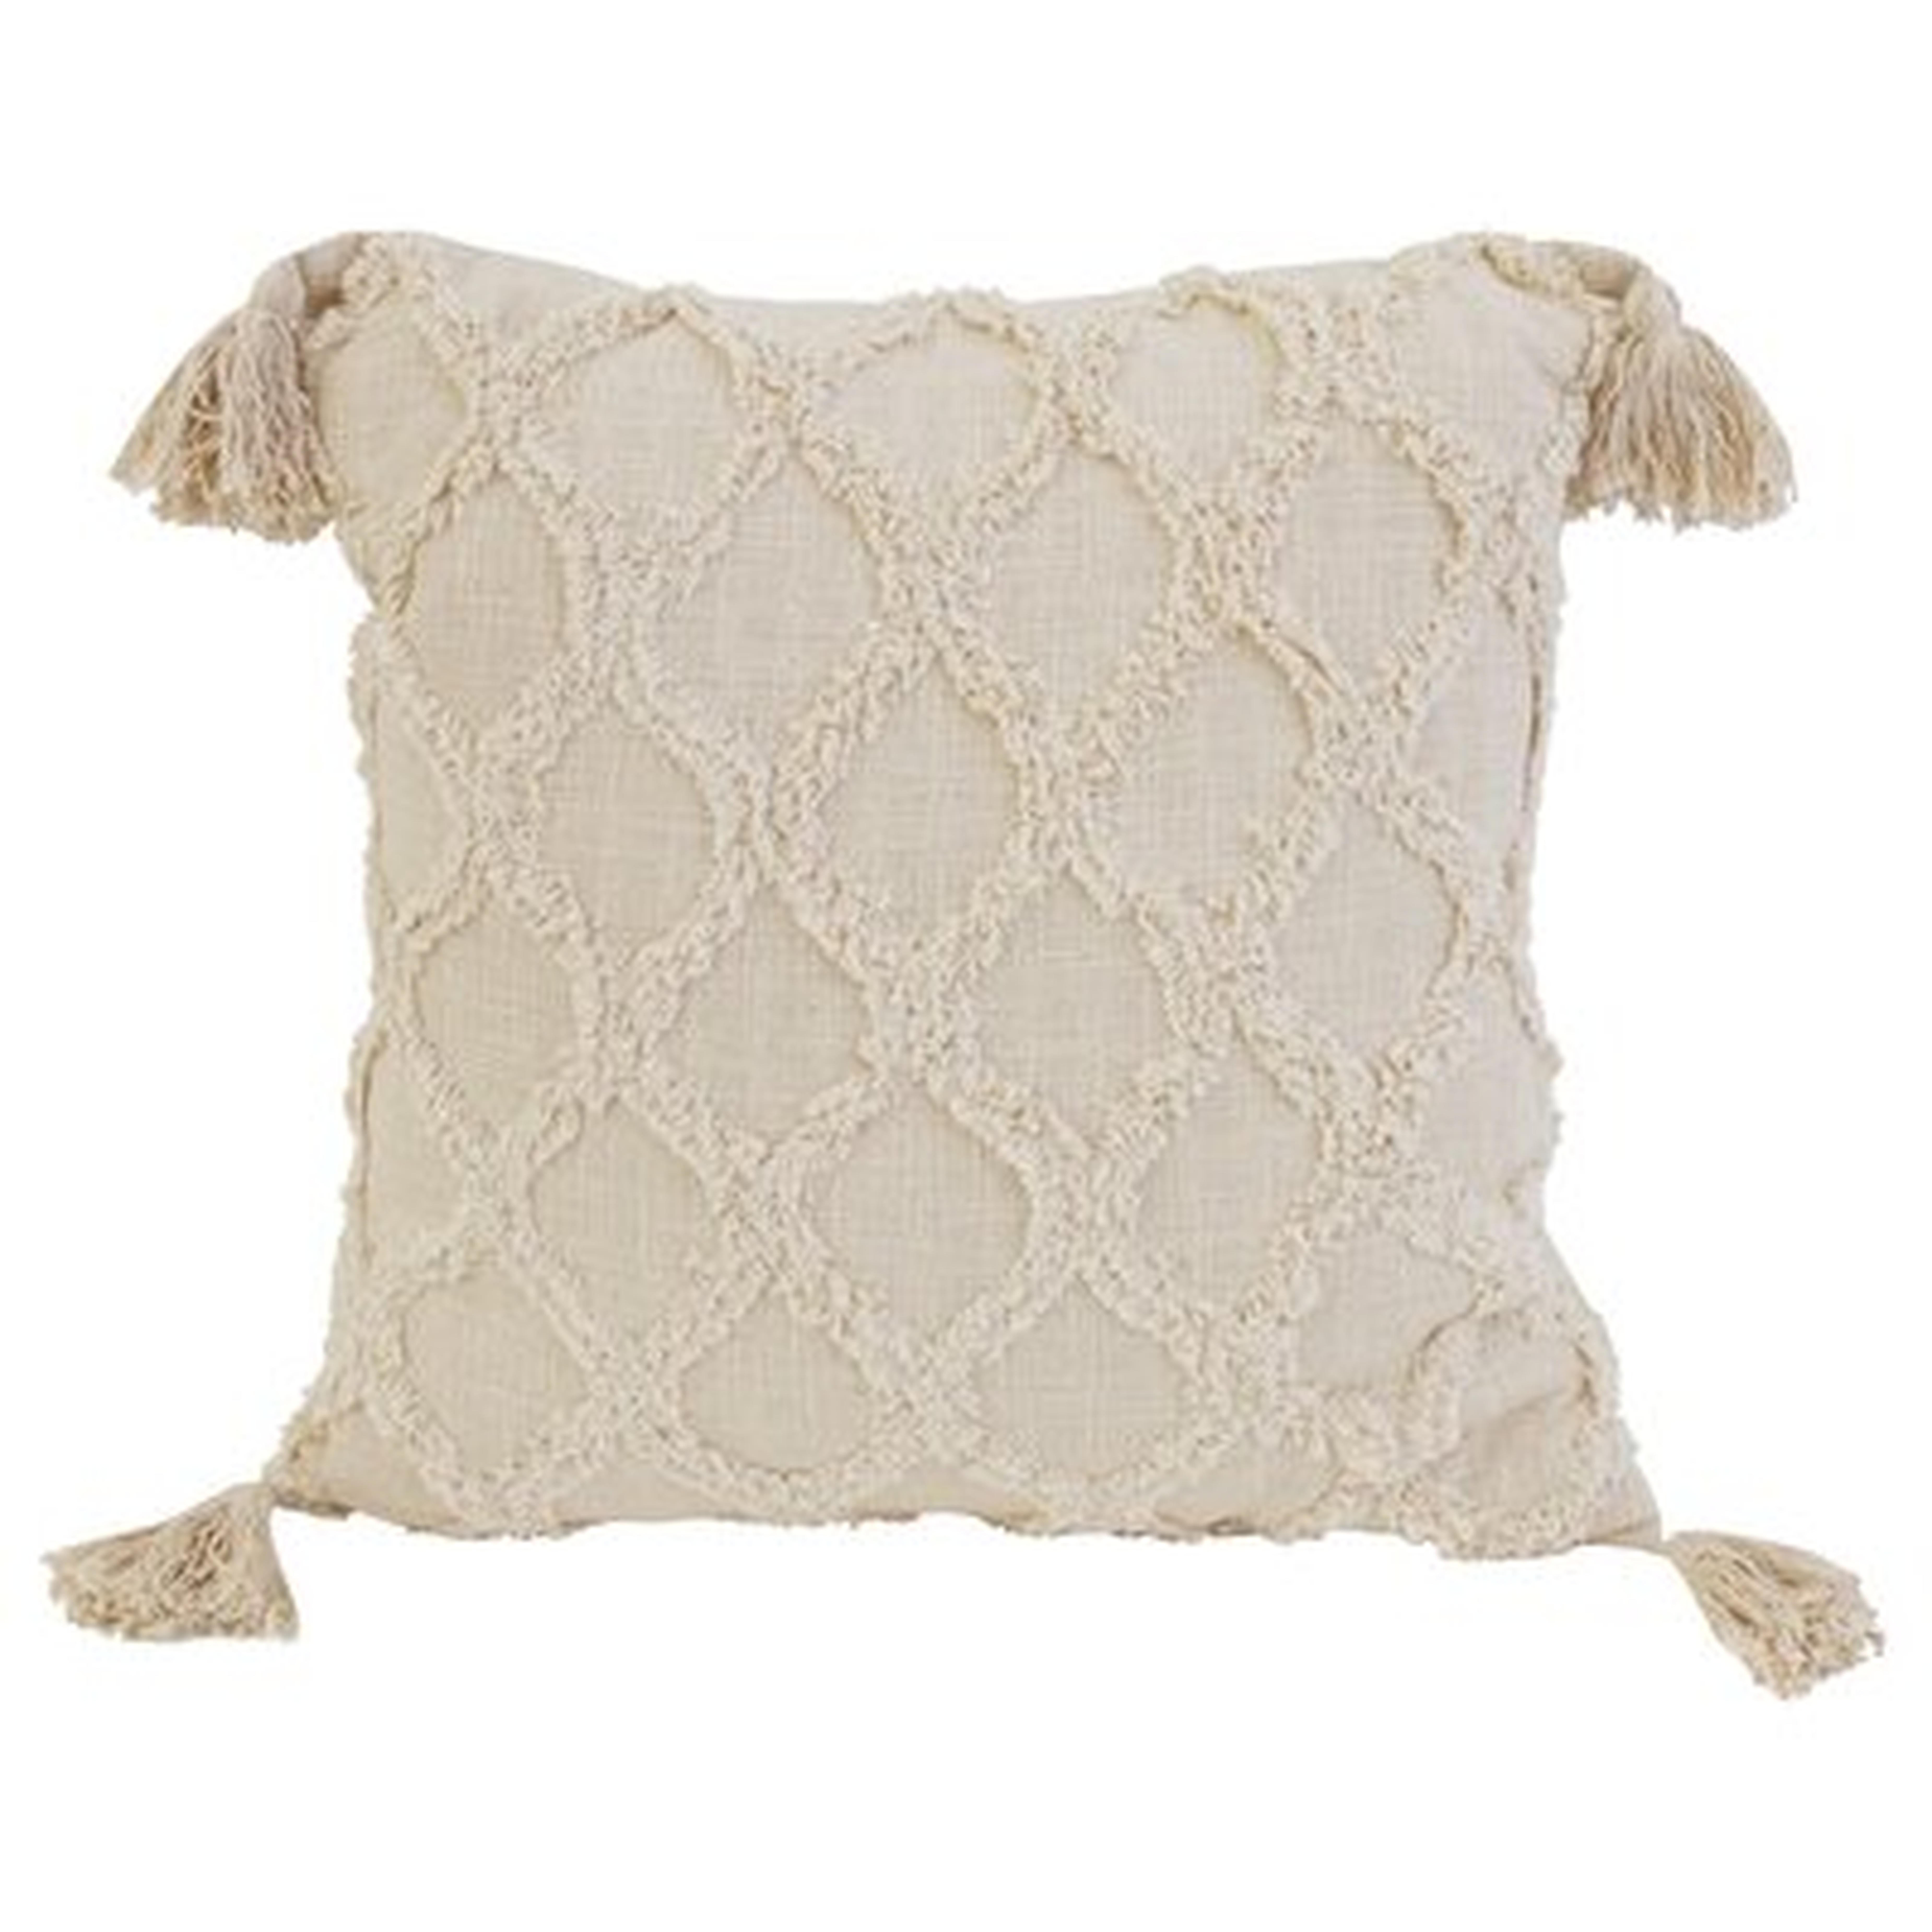 Sipan Square Cotton Pillow Cover and Insert - Wayfair